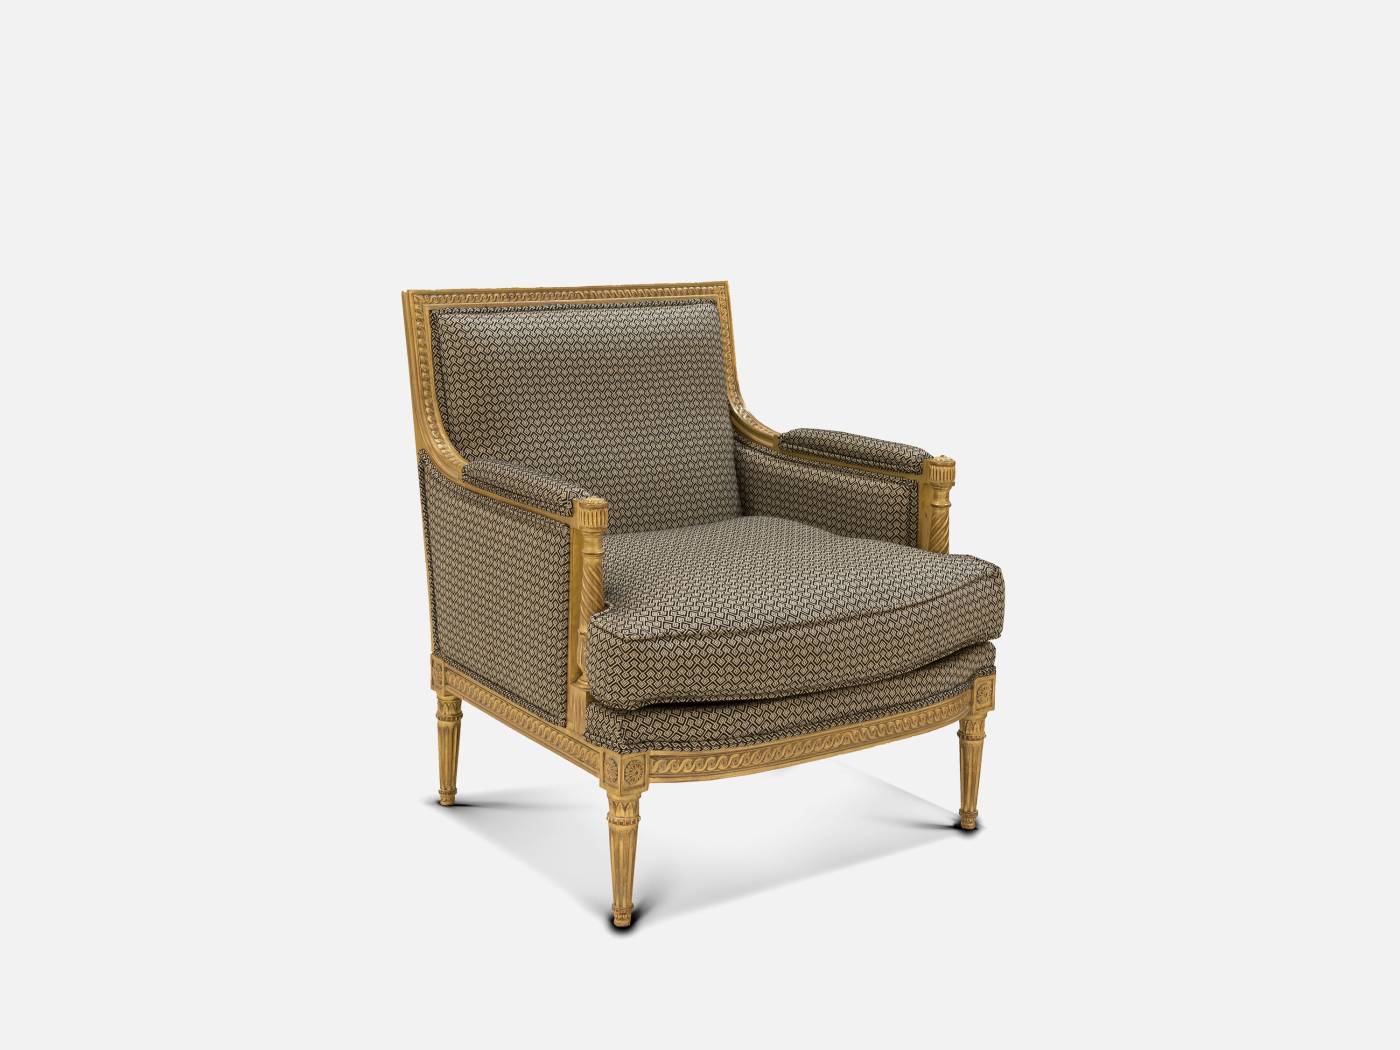 ART. 2233 – The elegance of luxury classic Armchairs made in Italy by C.G. Capelletti.